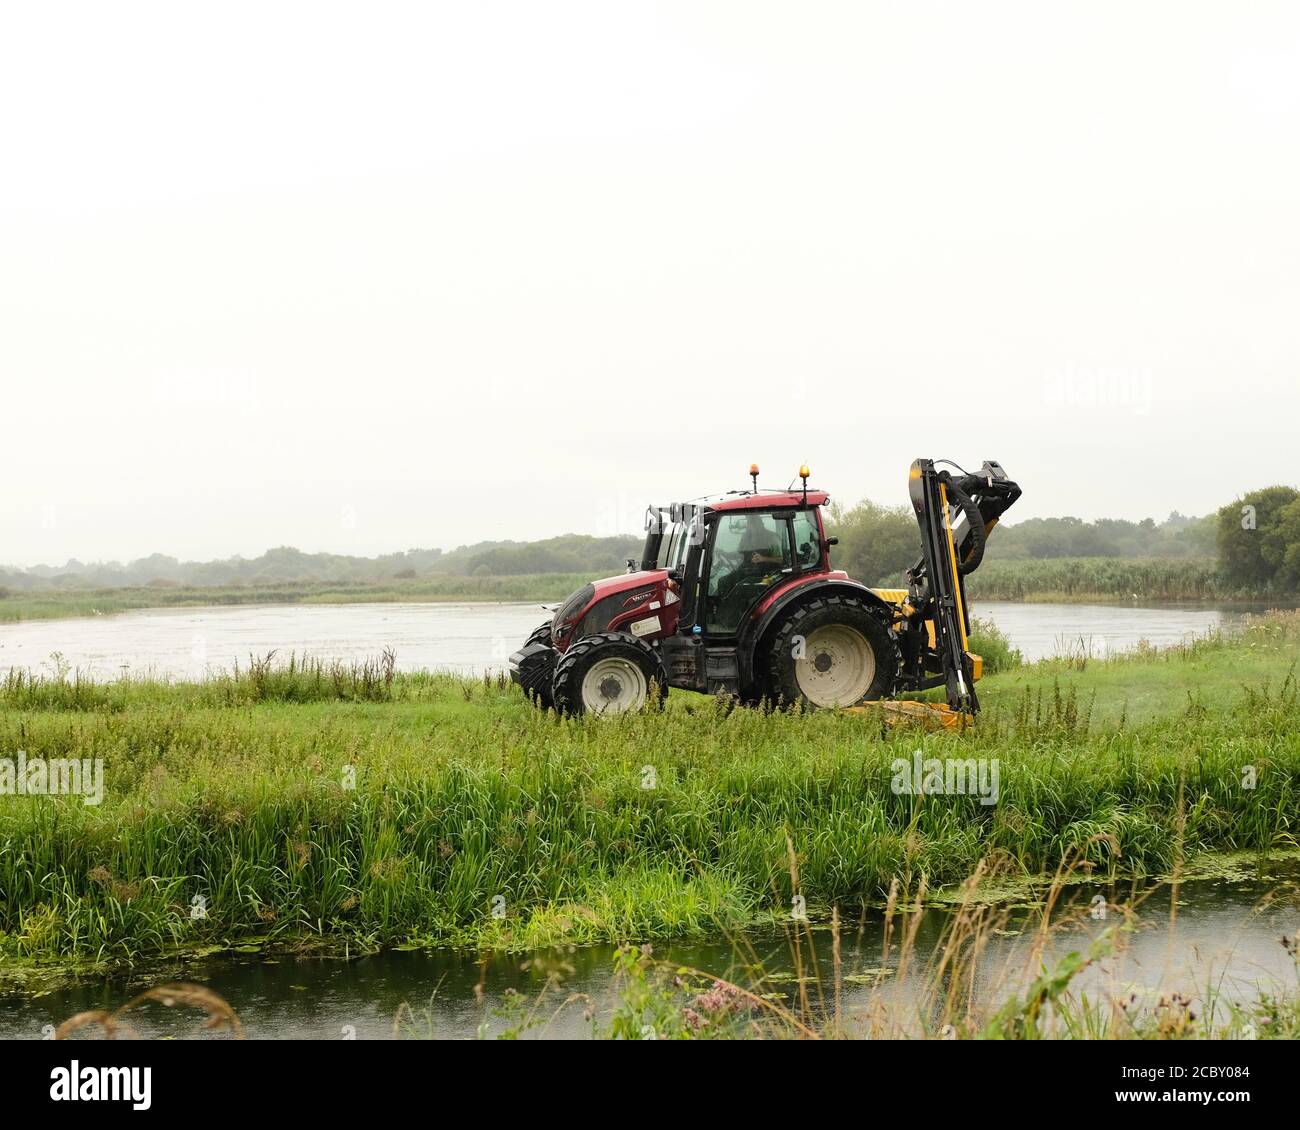 August 2020 - Environment Agency tractor mowing and grass cutting beside a river / drain Stock Photo